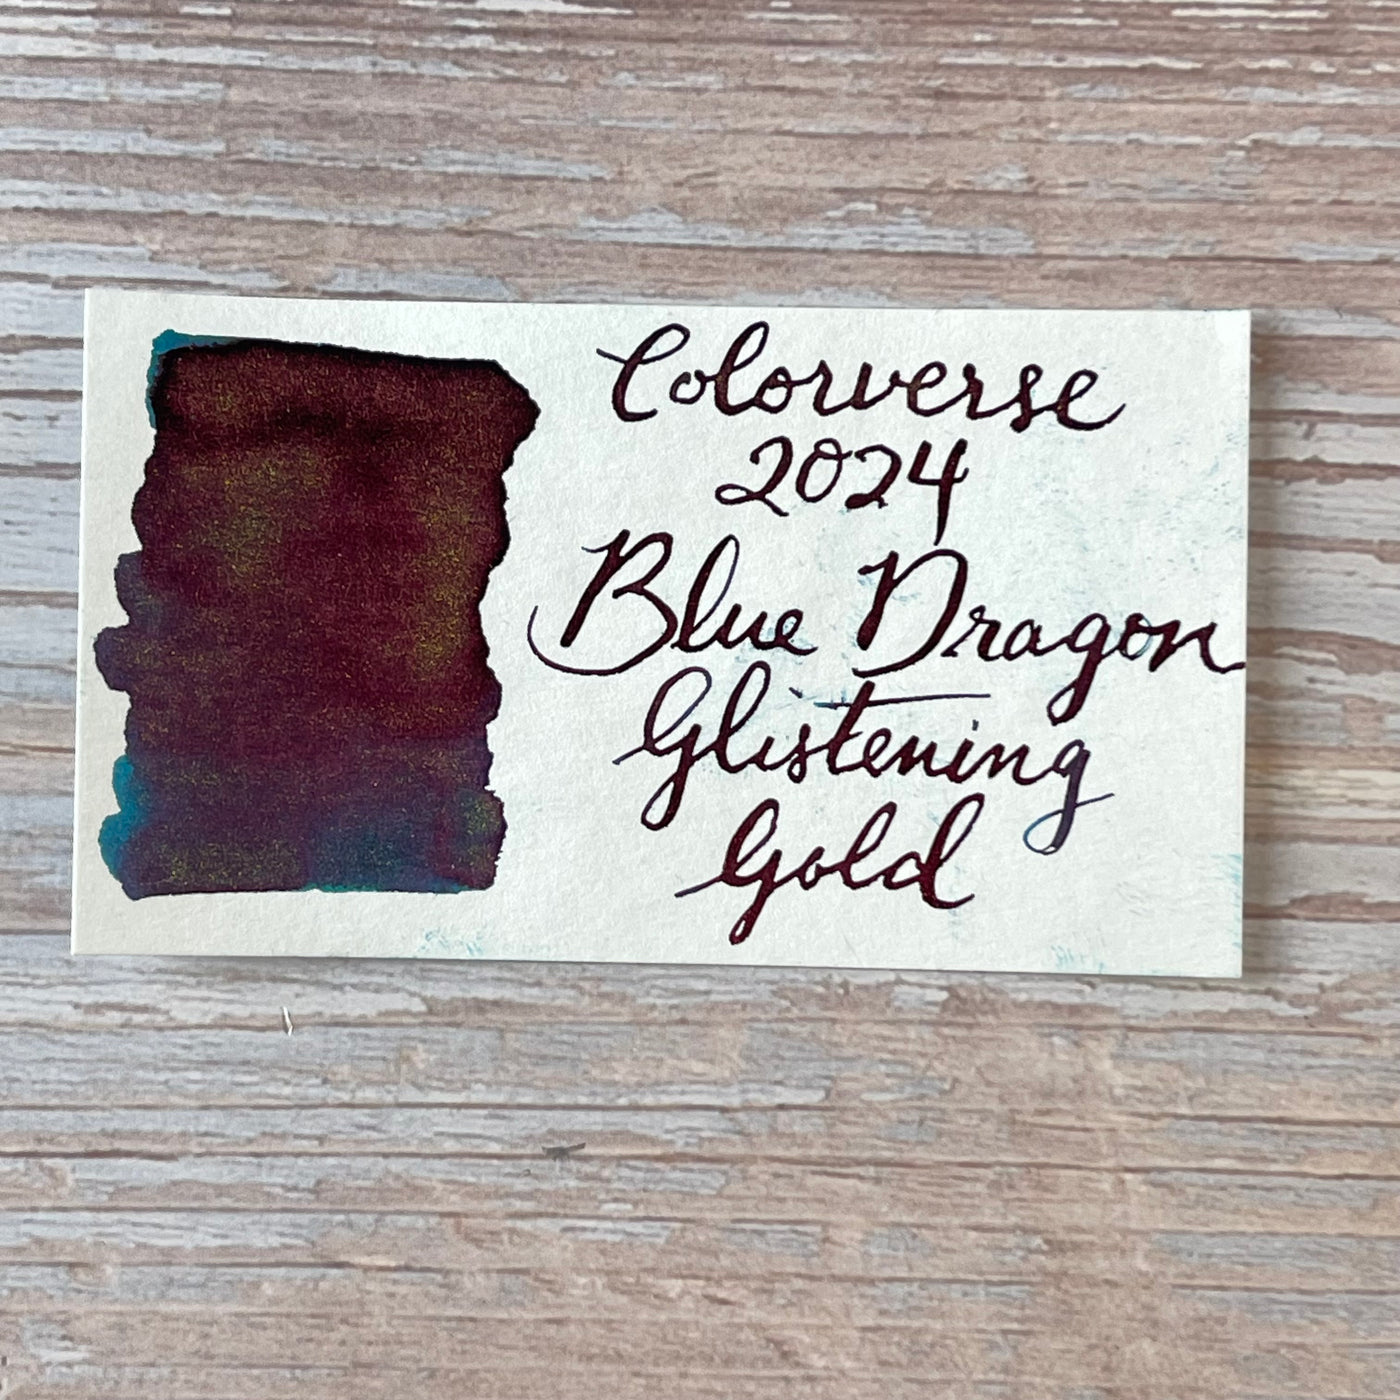 Colorverse 15ml 2024 Blue Dragon Glistening Gold (Special Edition)